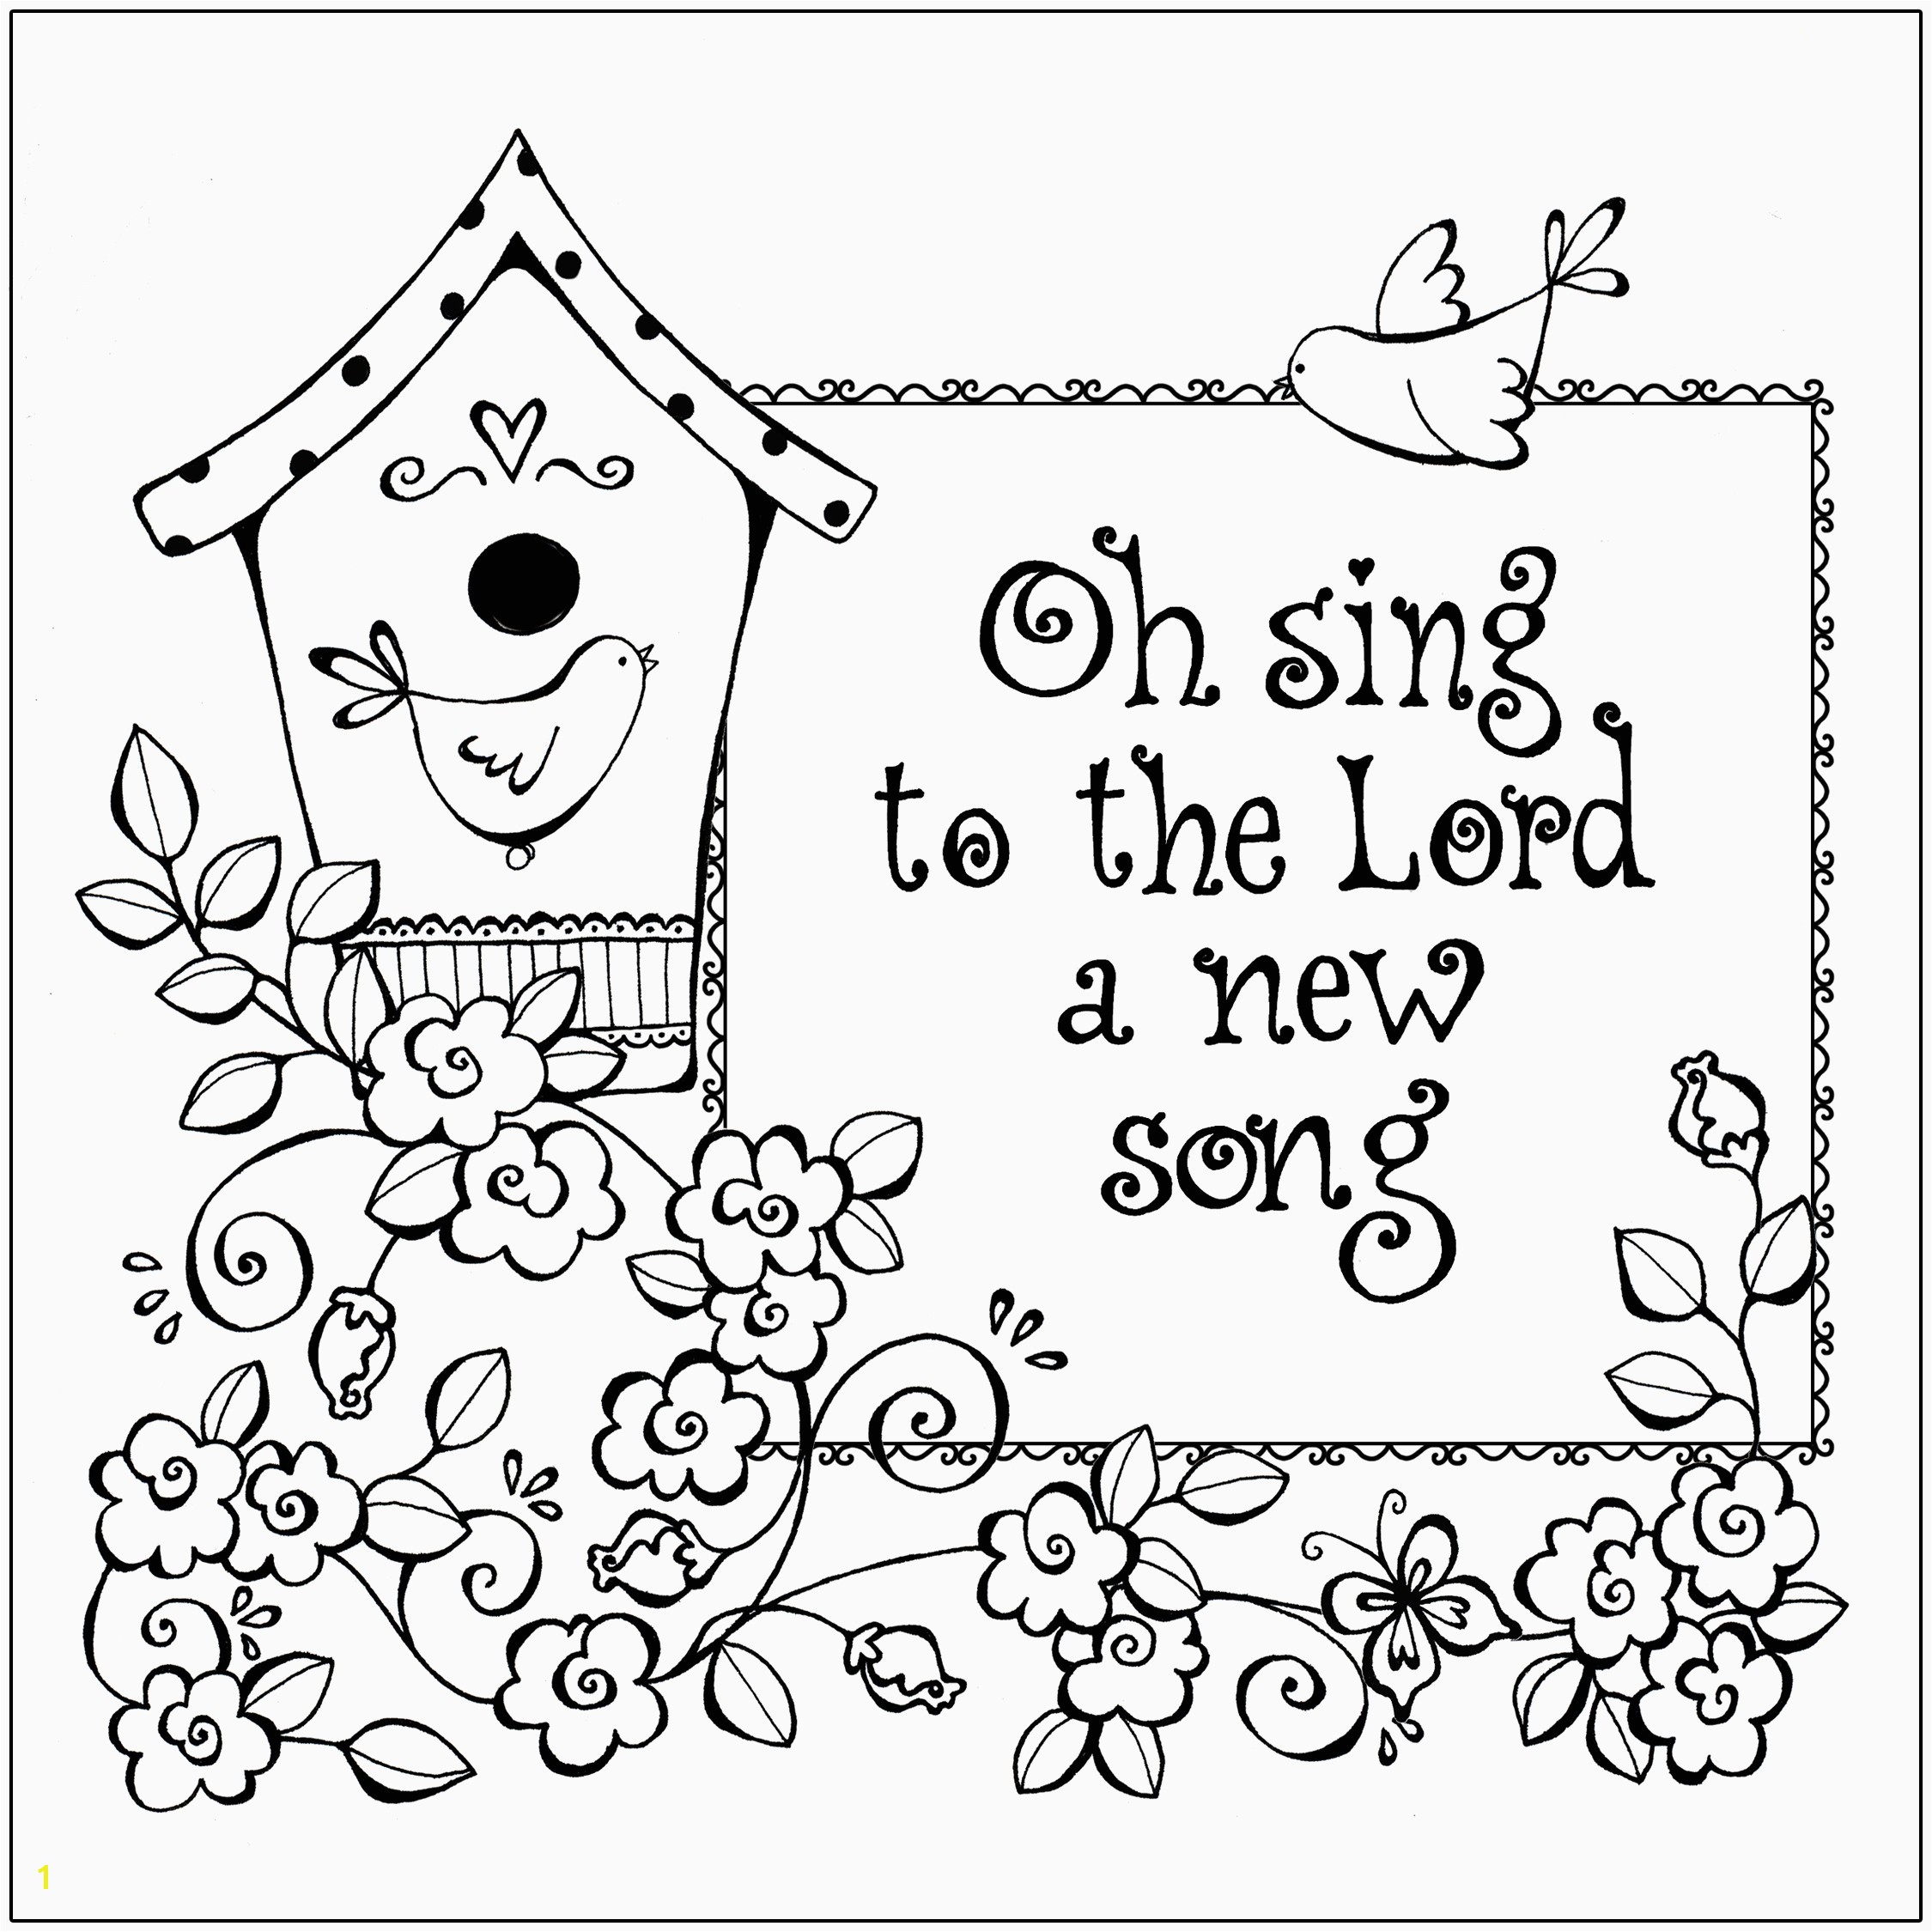 Coloring Pages for Sunday School Bible Coloring Pages for Kids Inspirational Home Coloring Pages Best